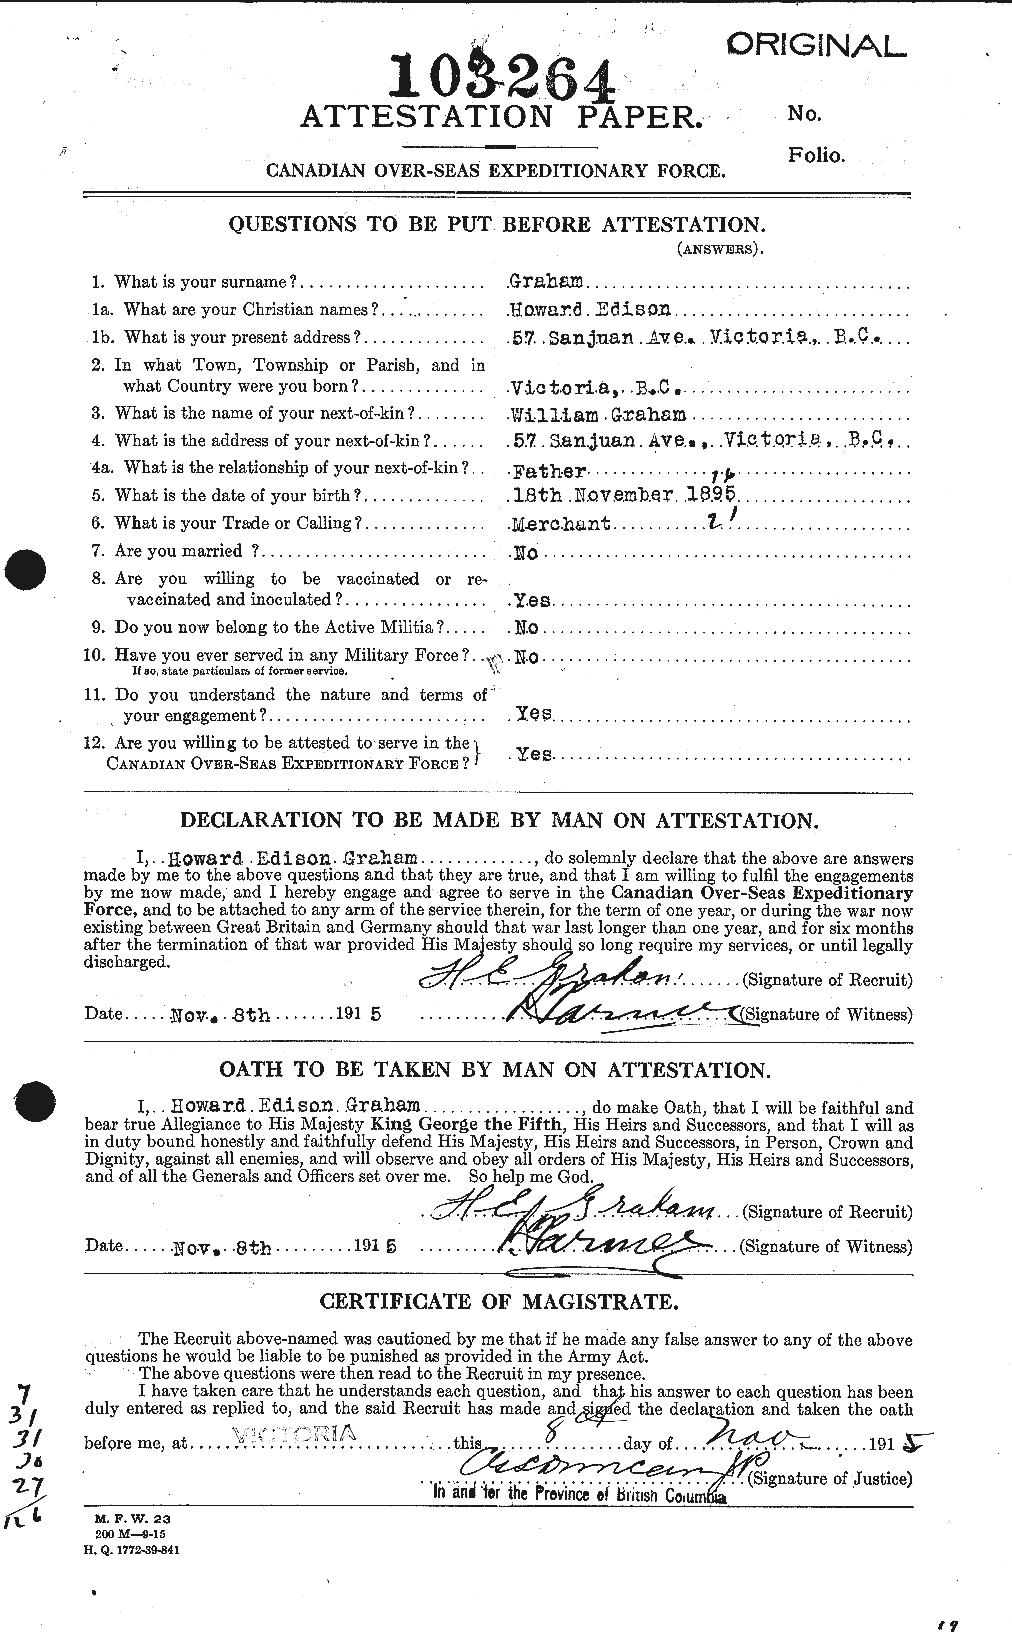 Personnel Records of the First World War - CEF 357750a